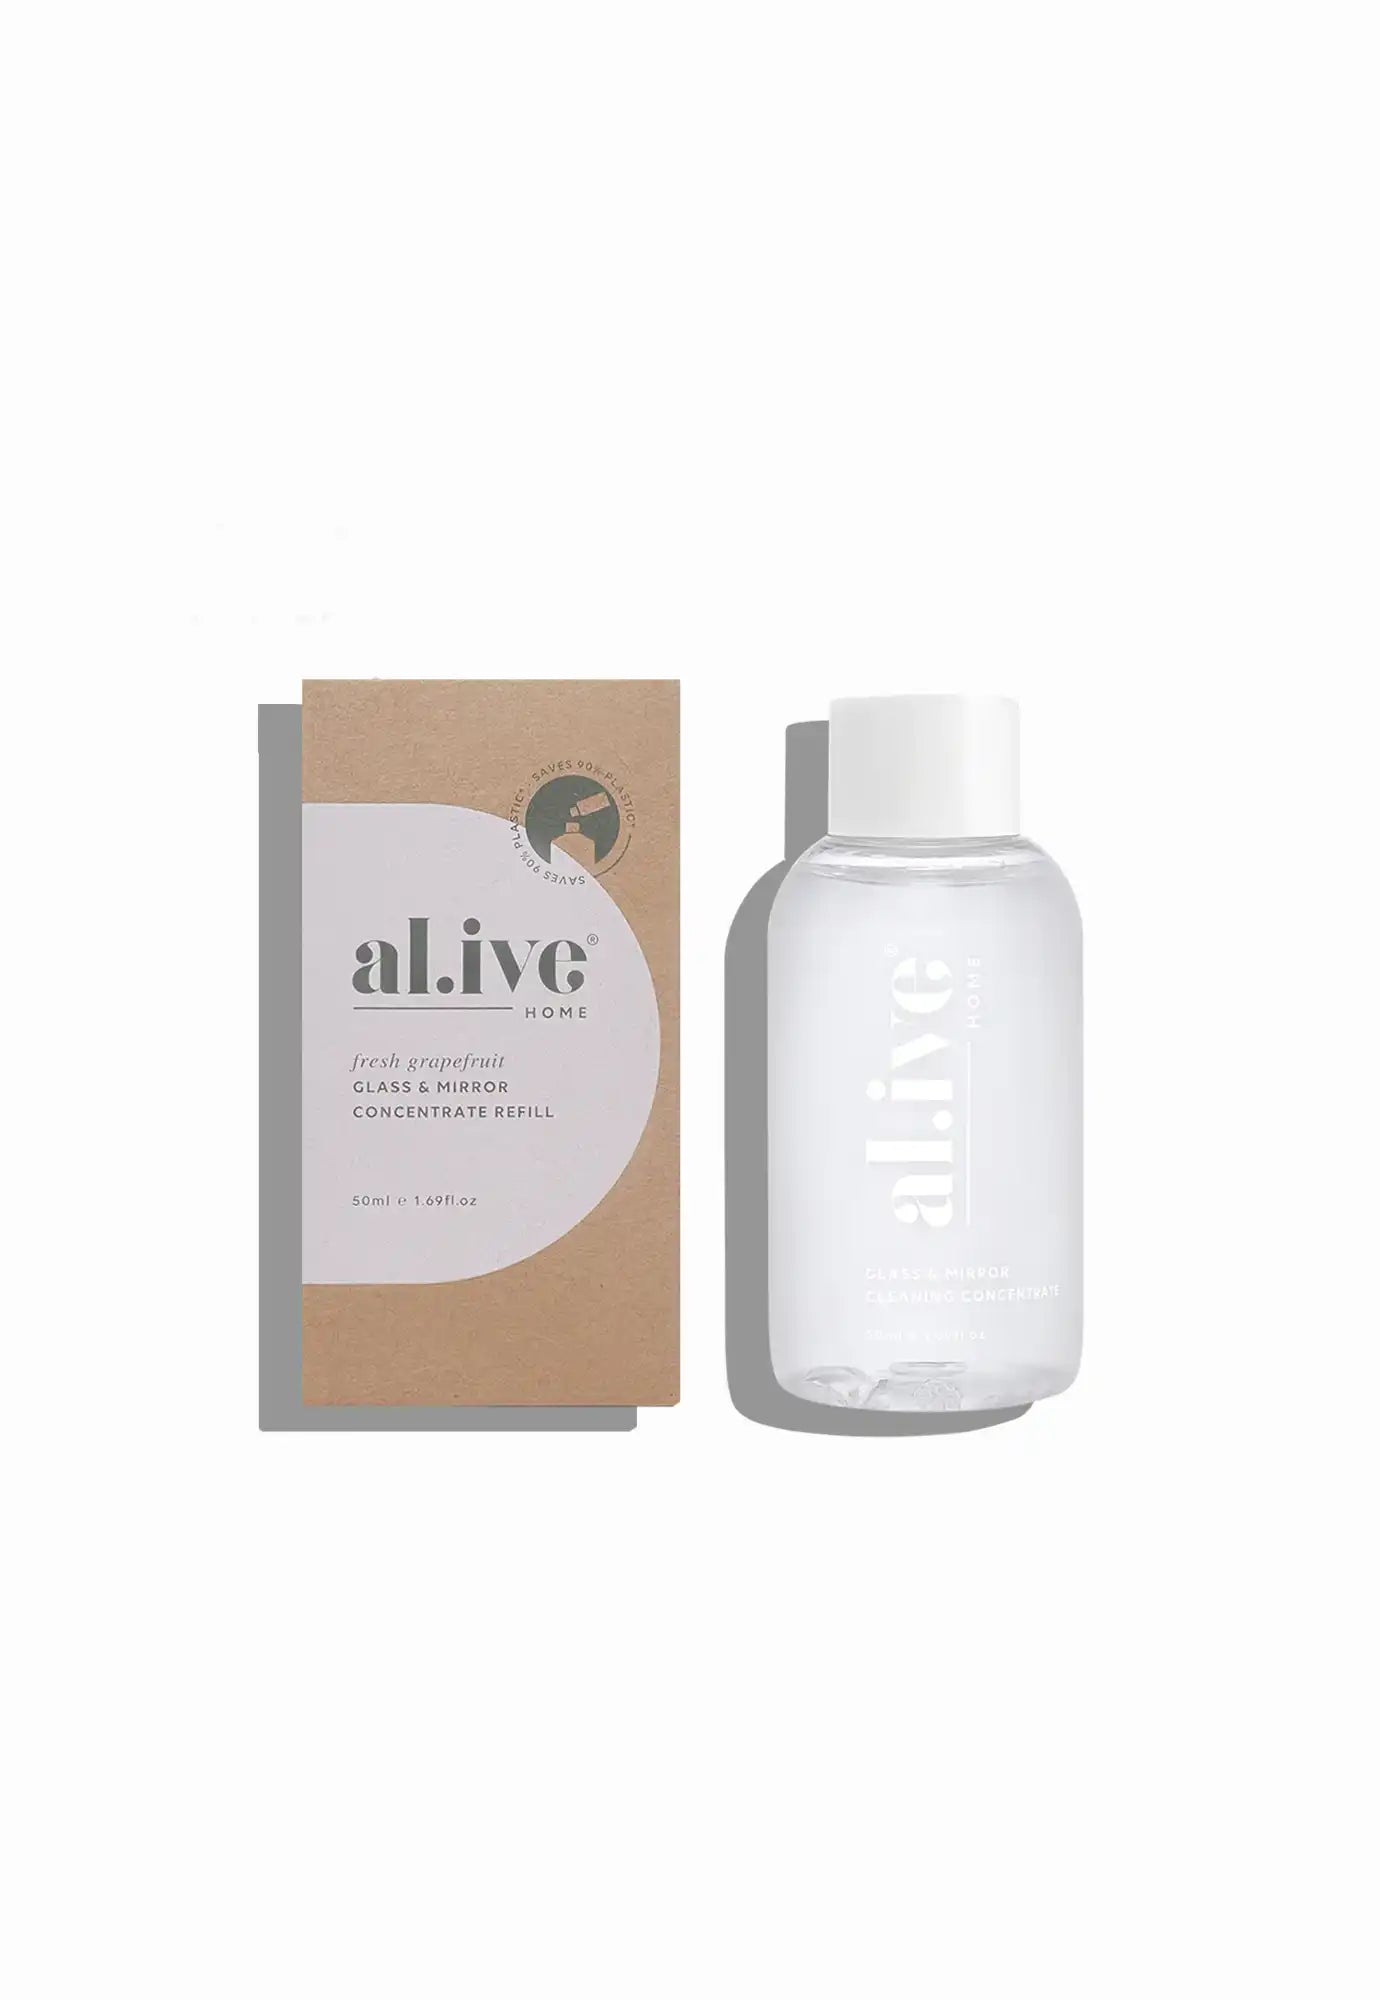 al.ive - home cleaning concentrate refills